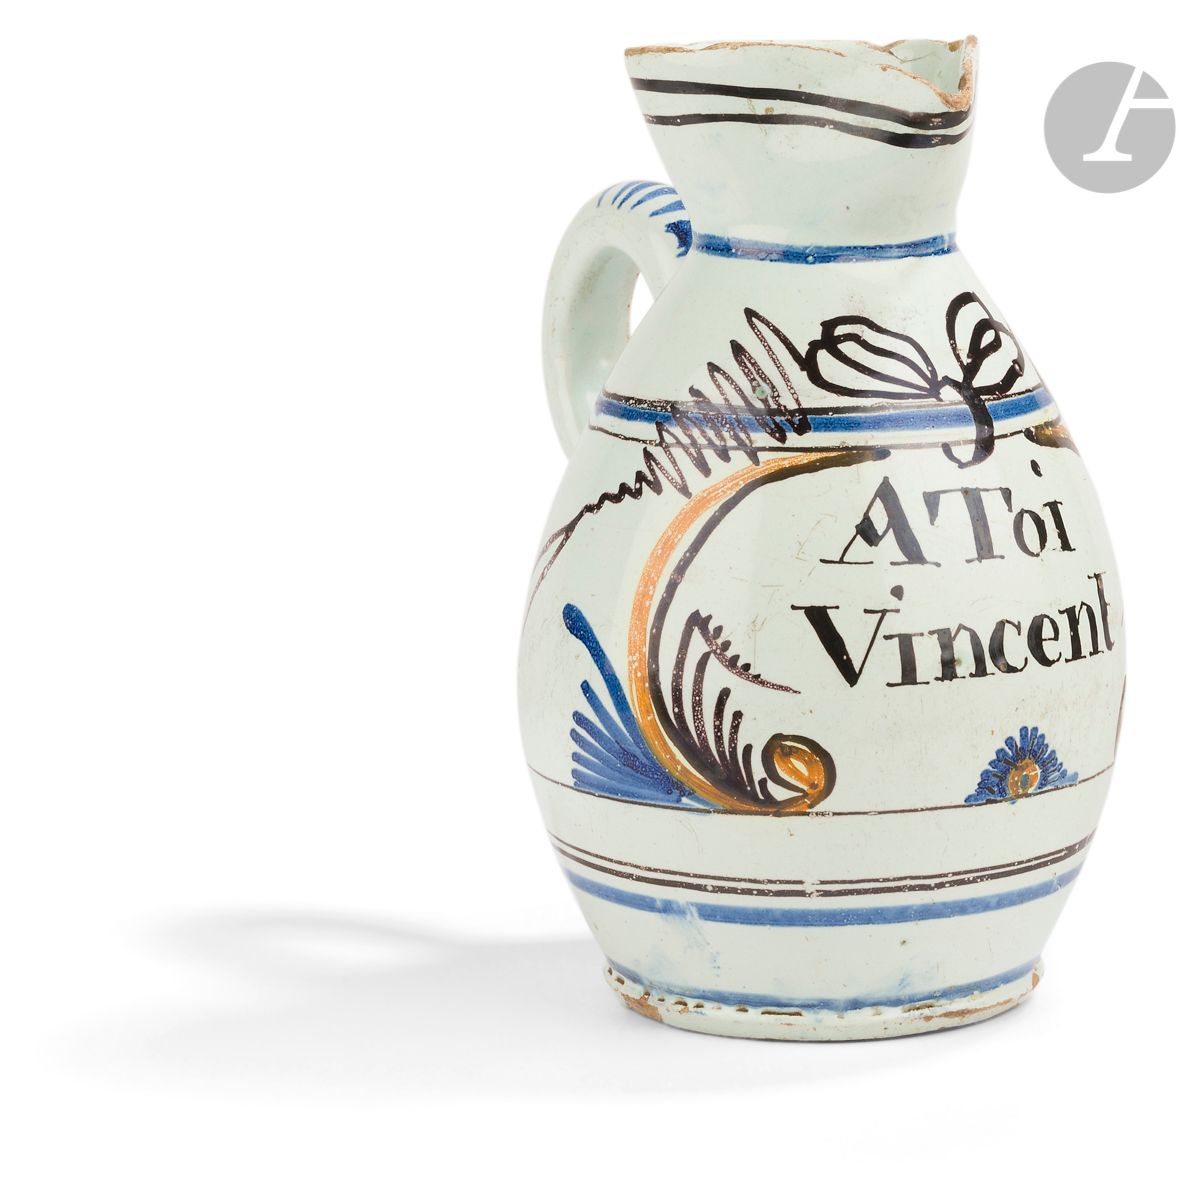 Null Sinceny
Earthenware pitcher with polychrome decoration of the inscription A&hellip;